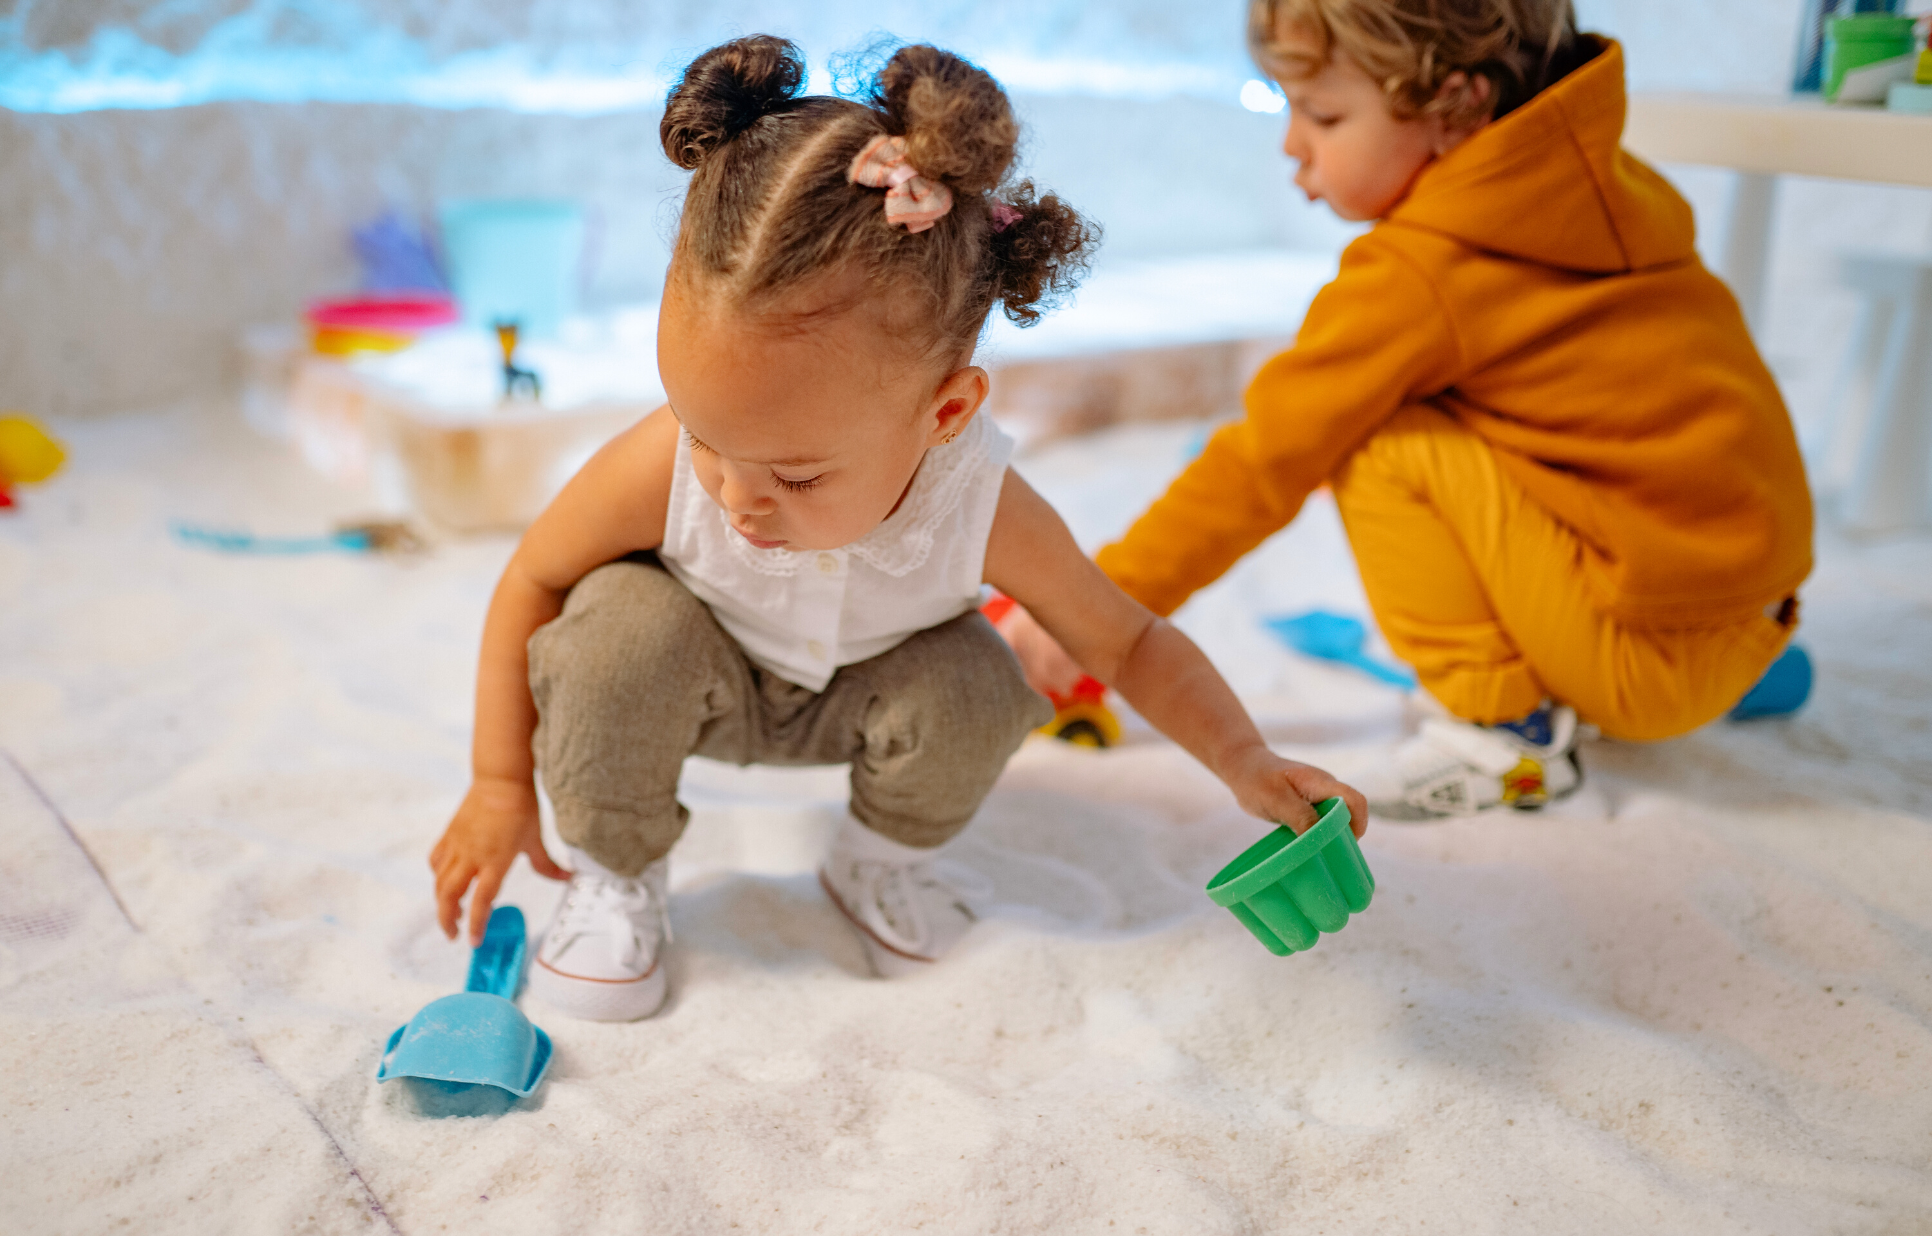 4 Fun Activities to Encourage Hands-On Learning for Your Toddler